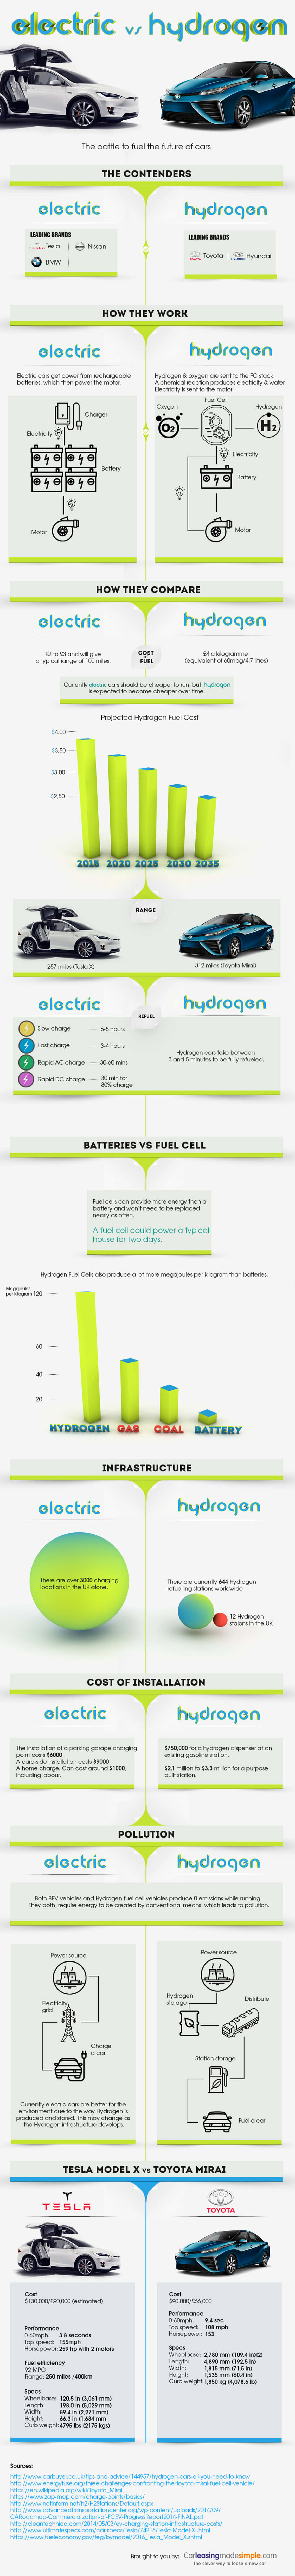 Electric vs Hydrogen Future of Cars Infographic